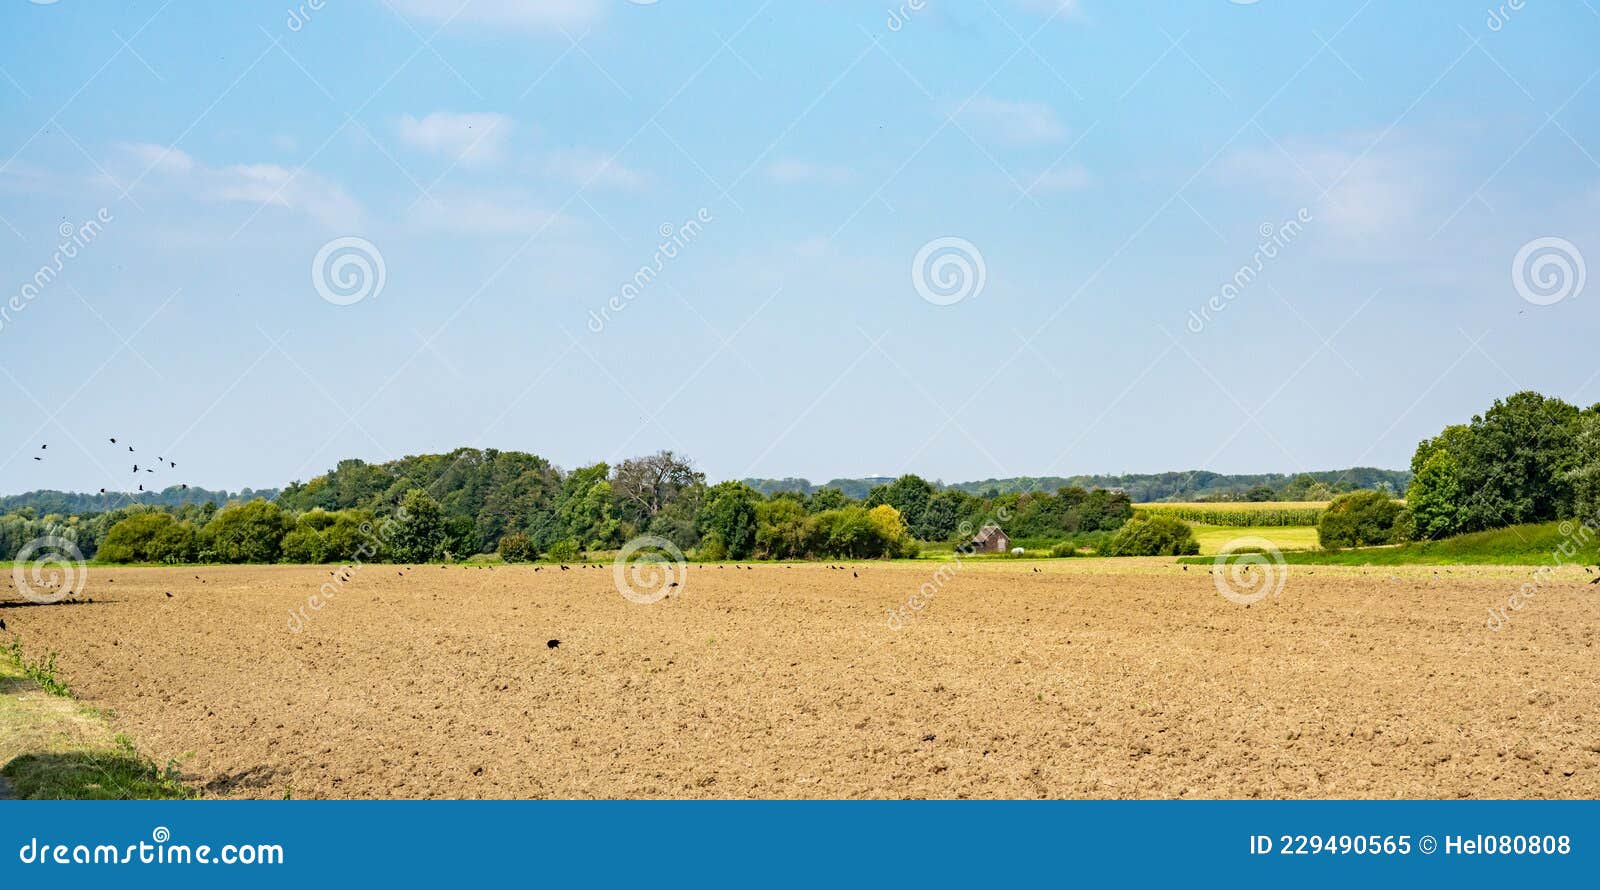 crows peck for grains after harvesting on the freshly ploughed field in autumn. rural area with fields, meadows and forests and a